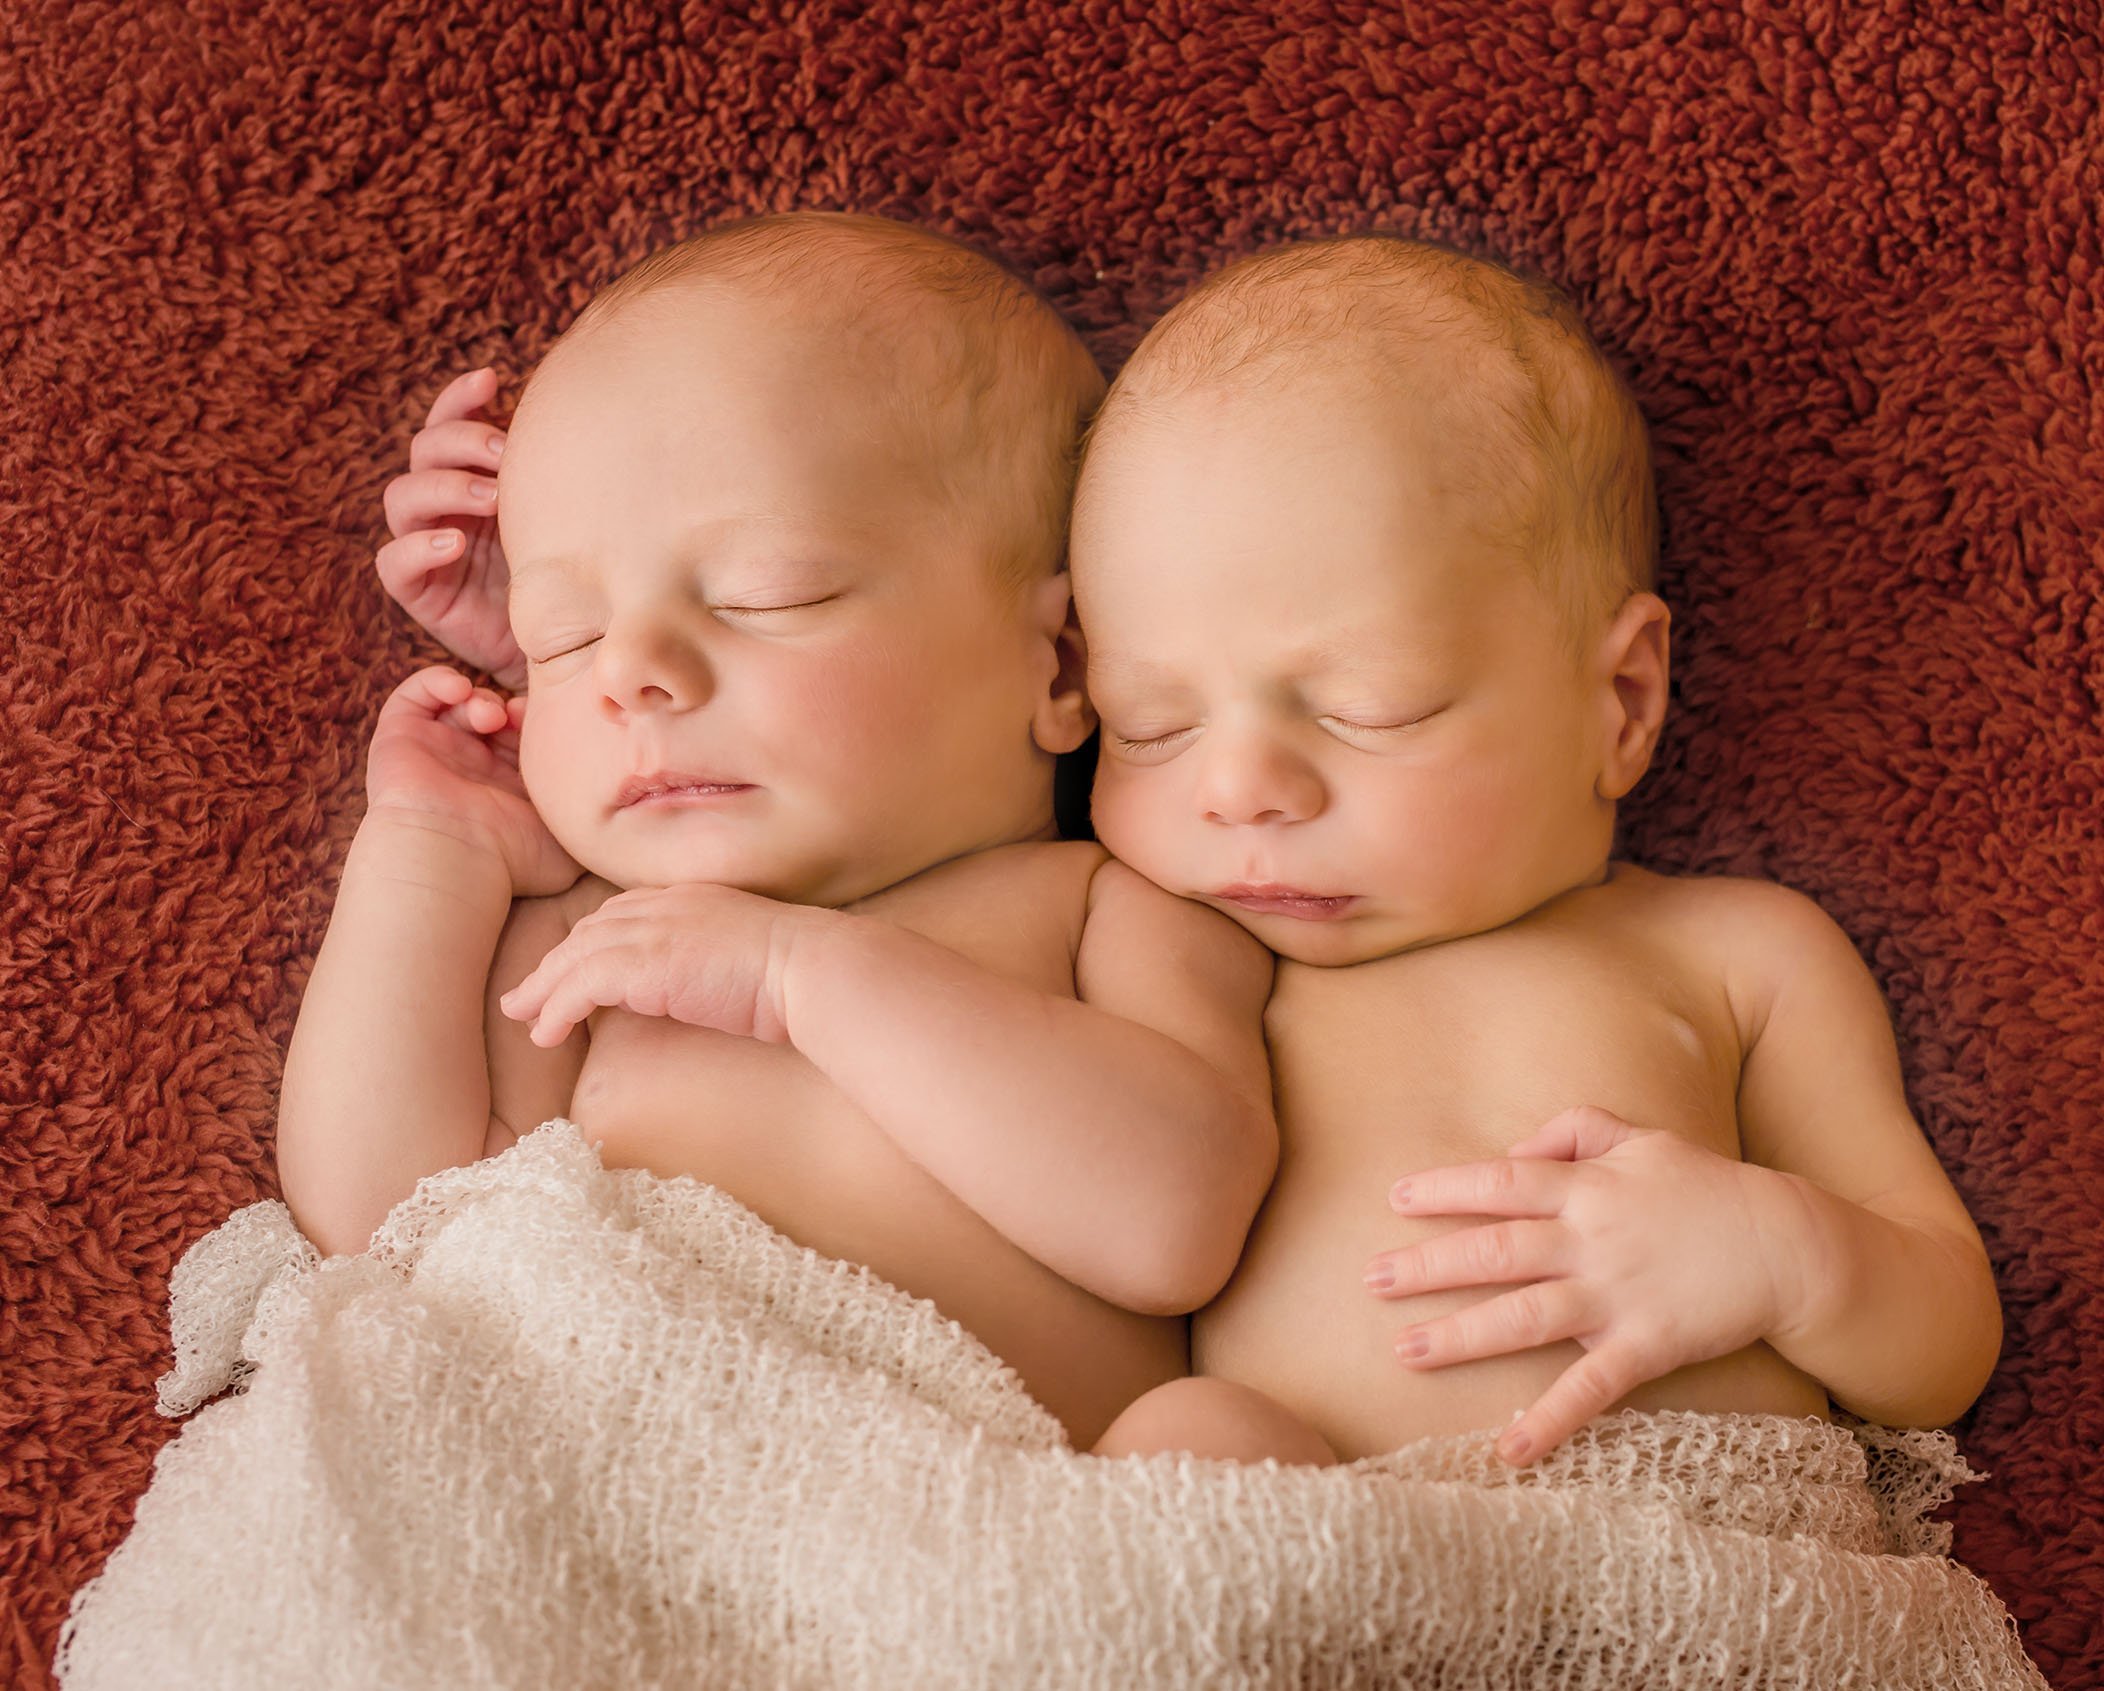 newborn twins sleeping with a cream blanket on them while lying on an orange blanket